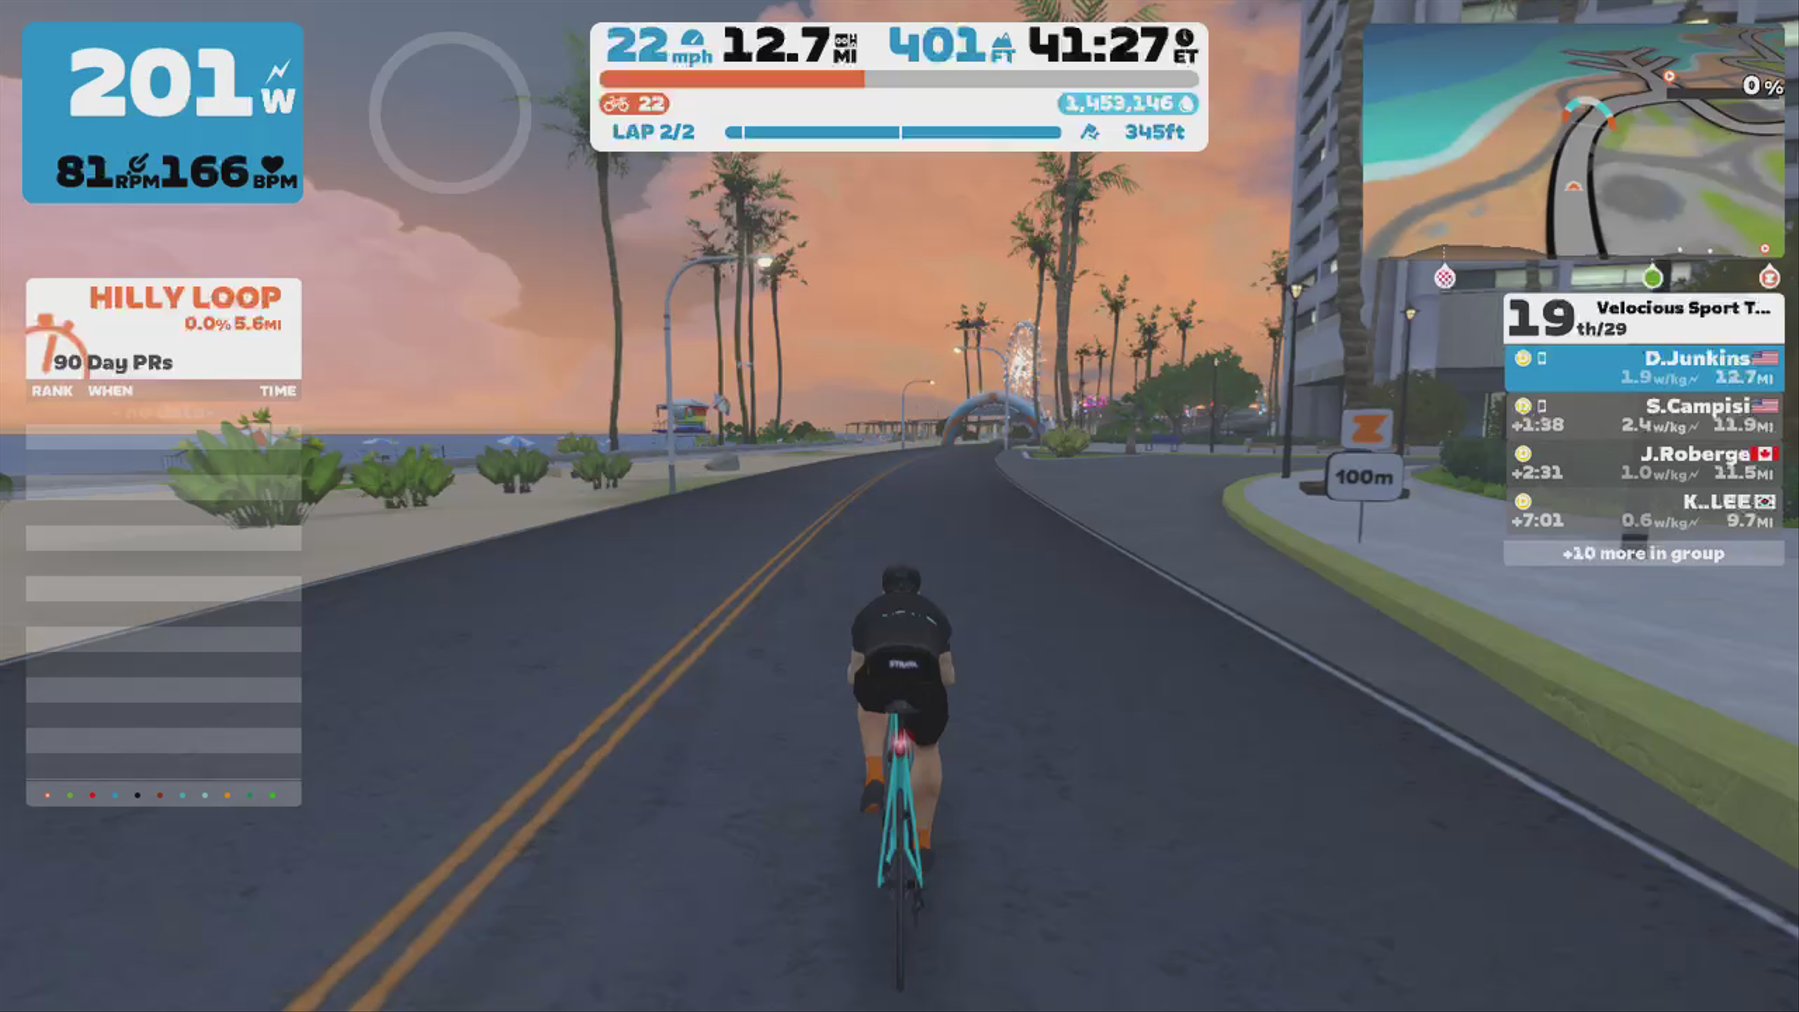 Zwift - Race: Velocious Sport Tue Night Criterium (Race) (D) on Flat Route in Watopia